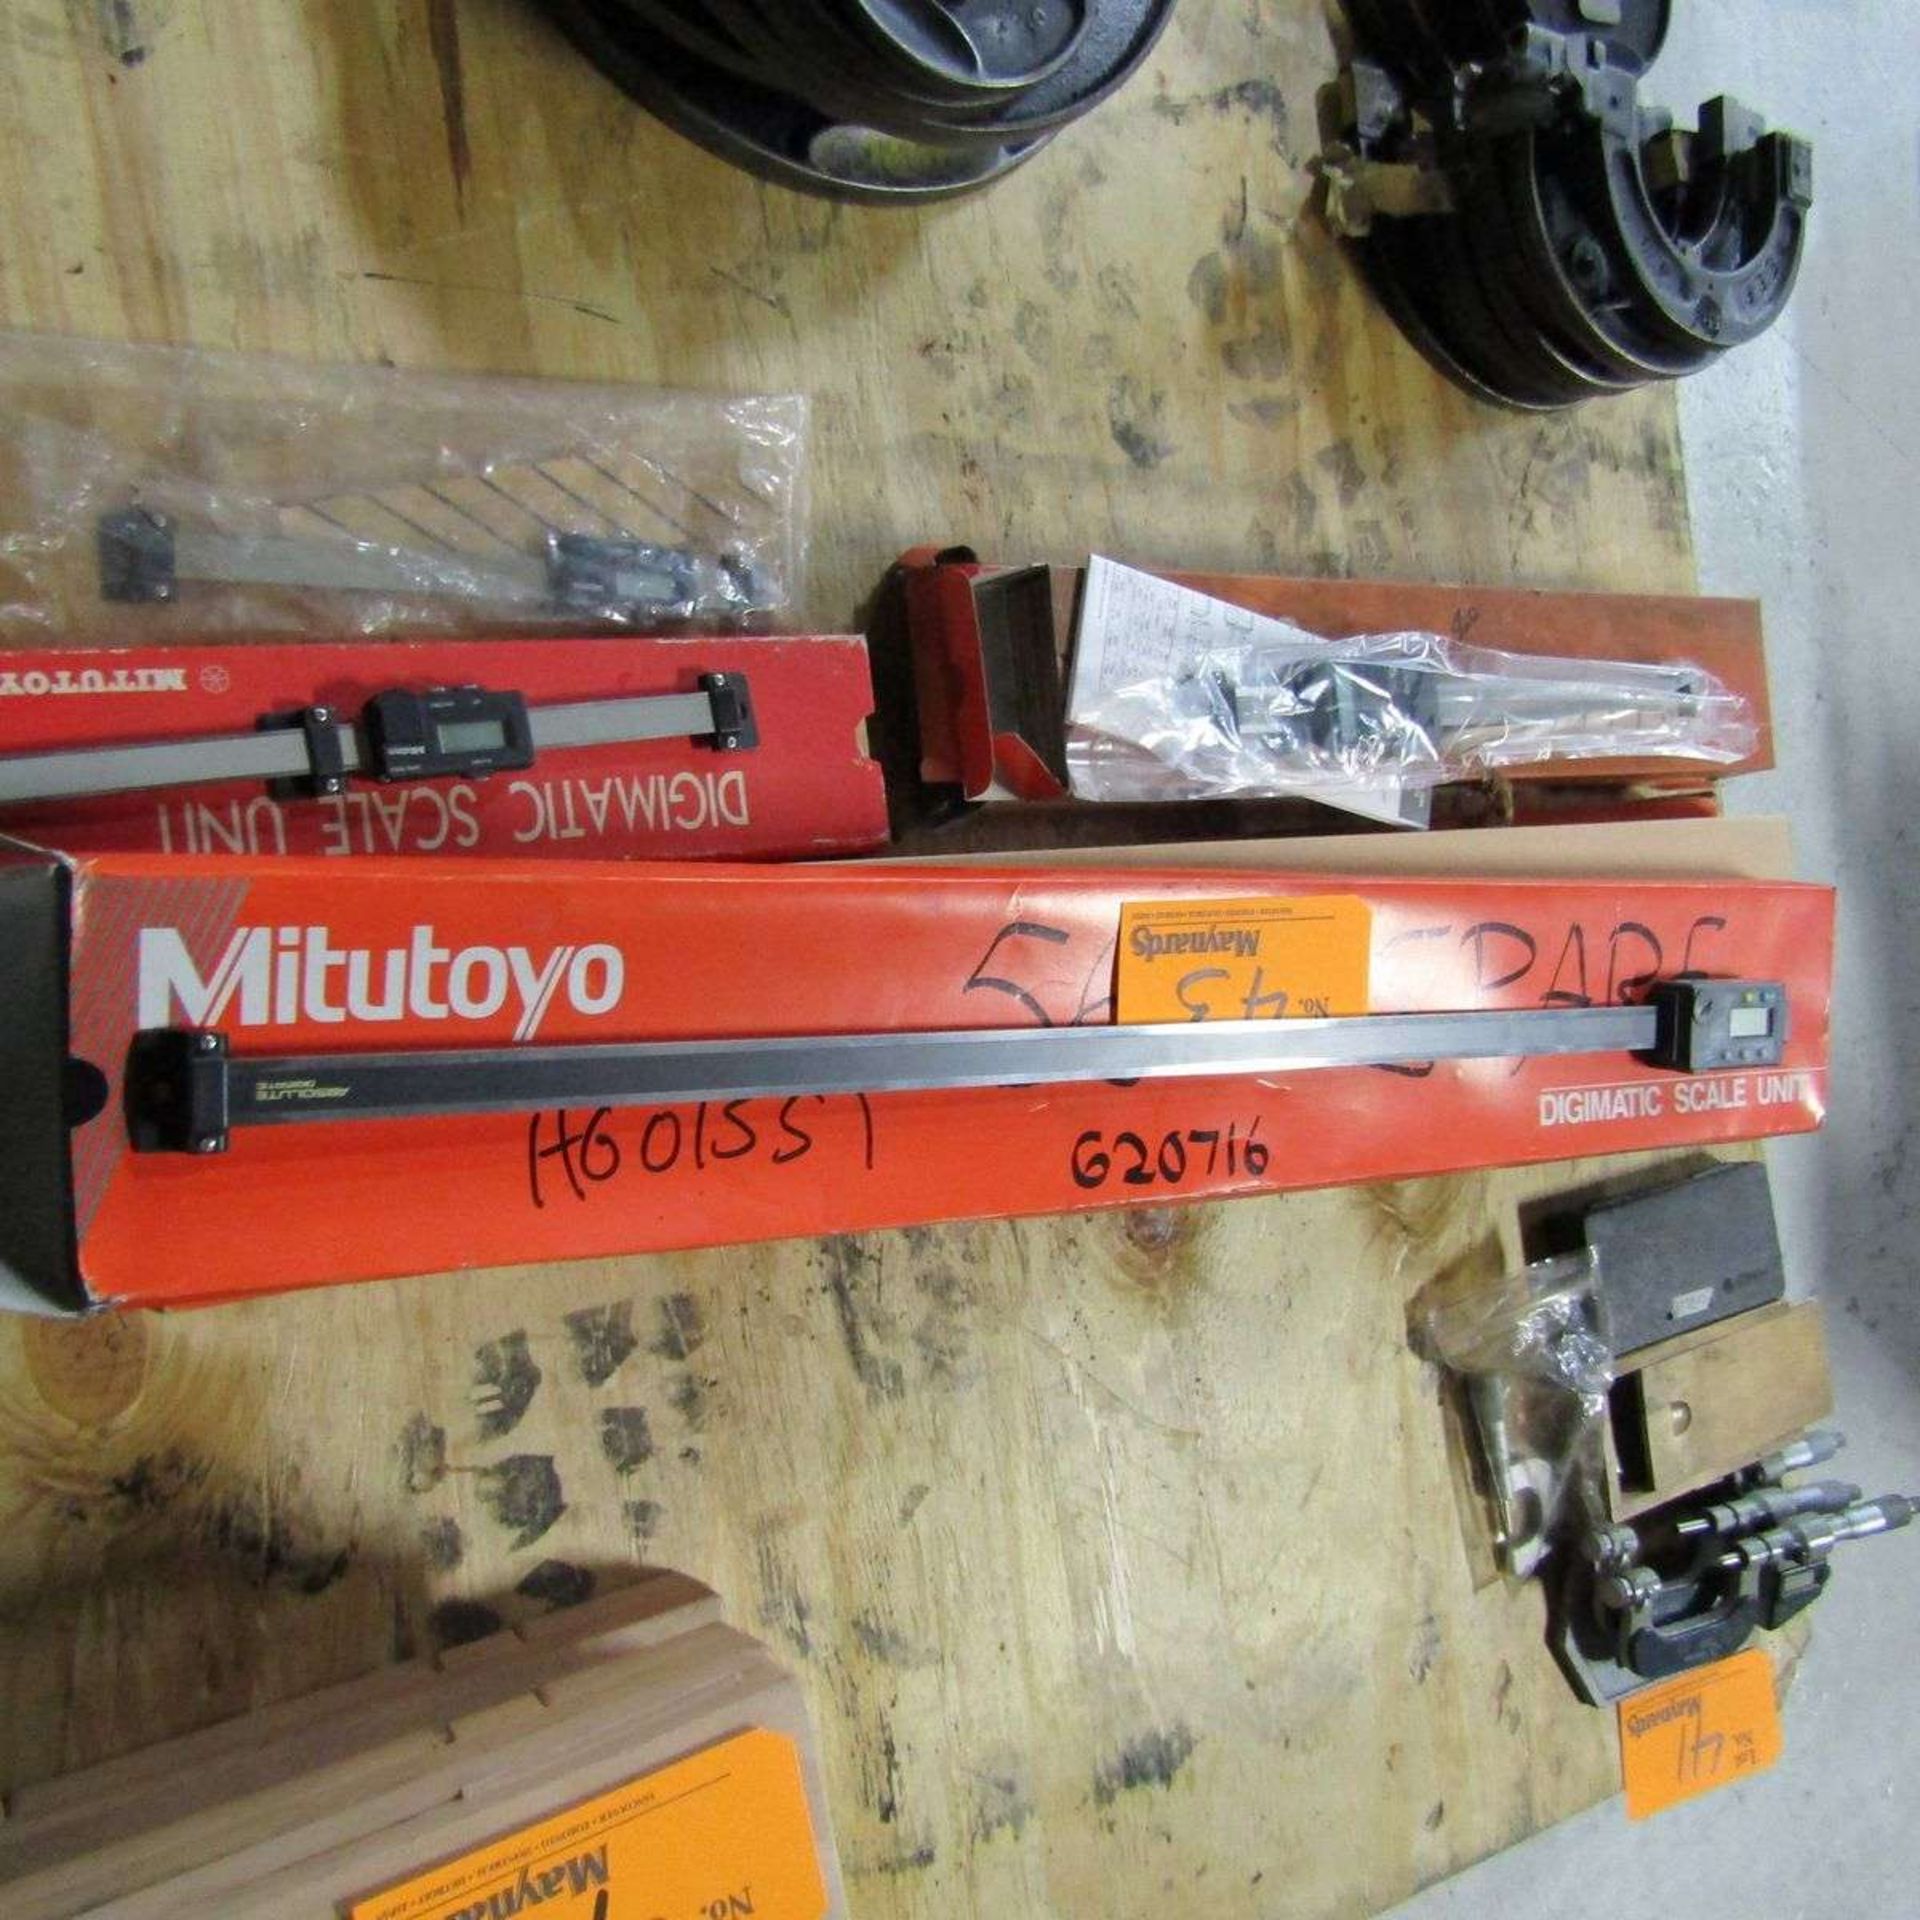 Mitutoyo Digimatic Caliper Gages - Image 4 of 4